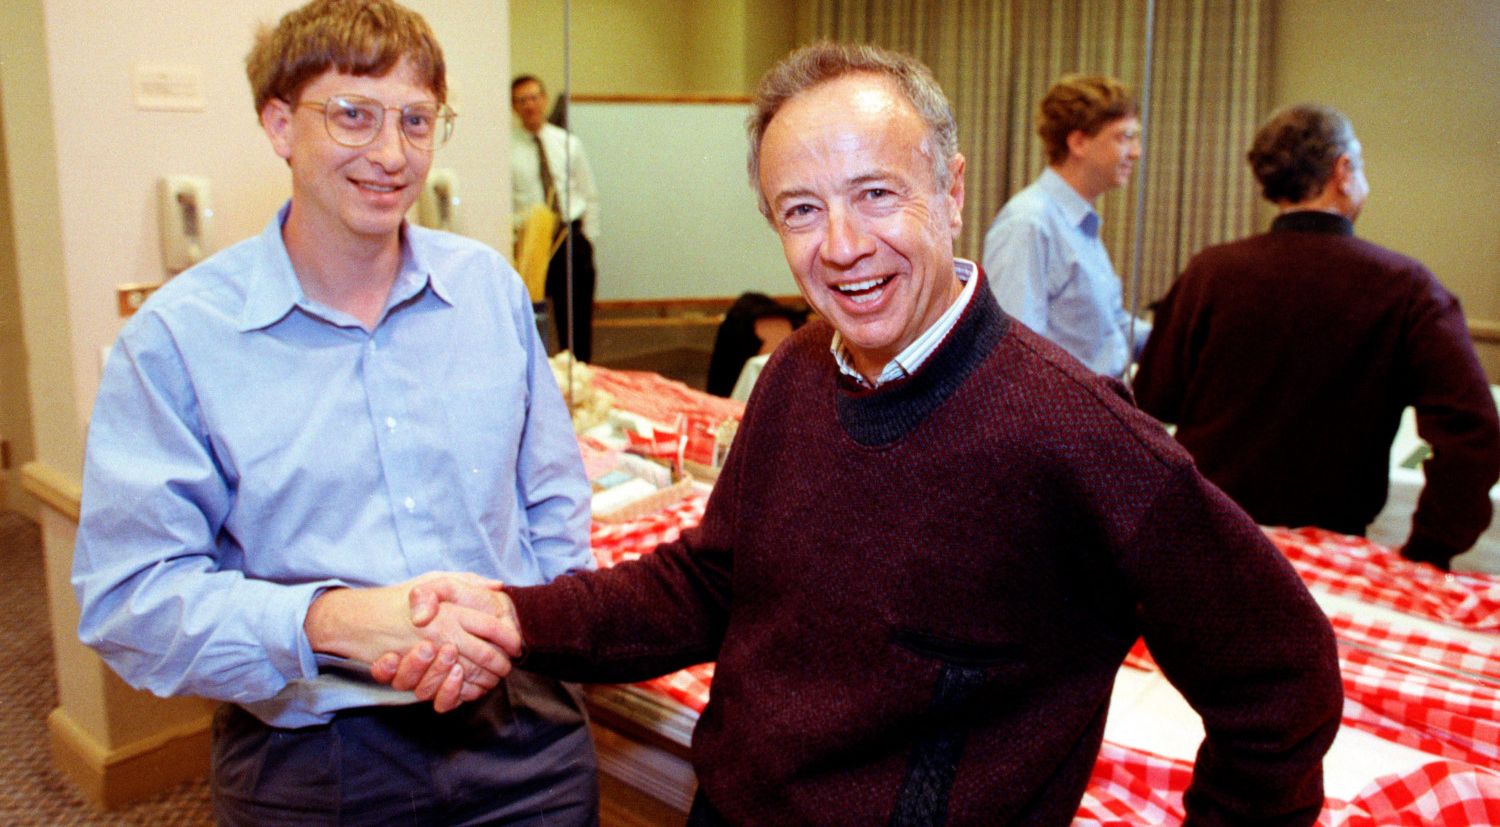 steve jobs and bill gates shaking hands